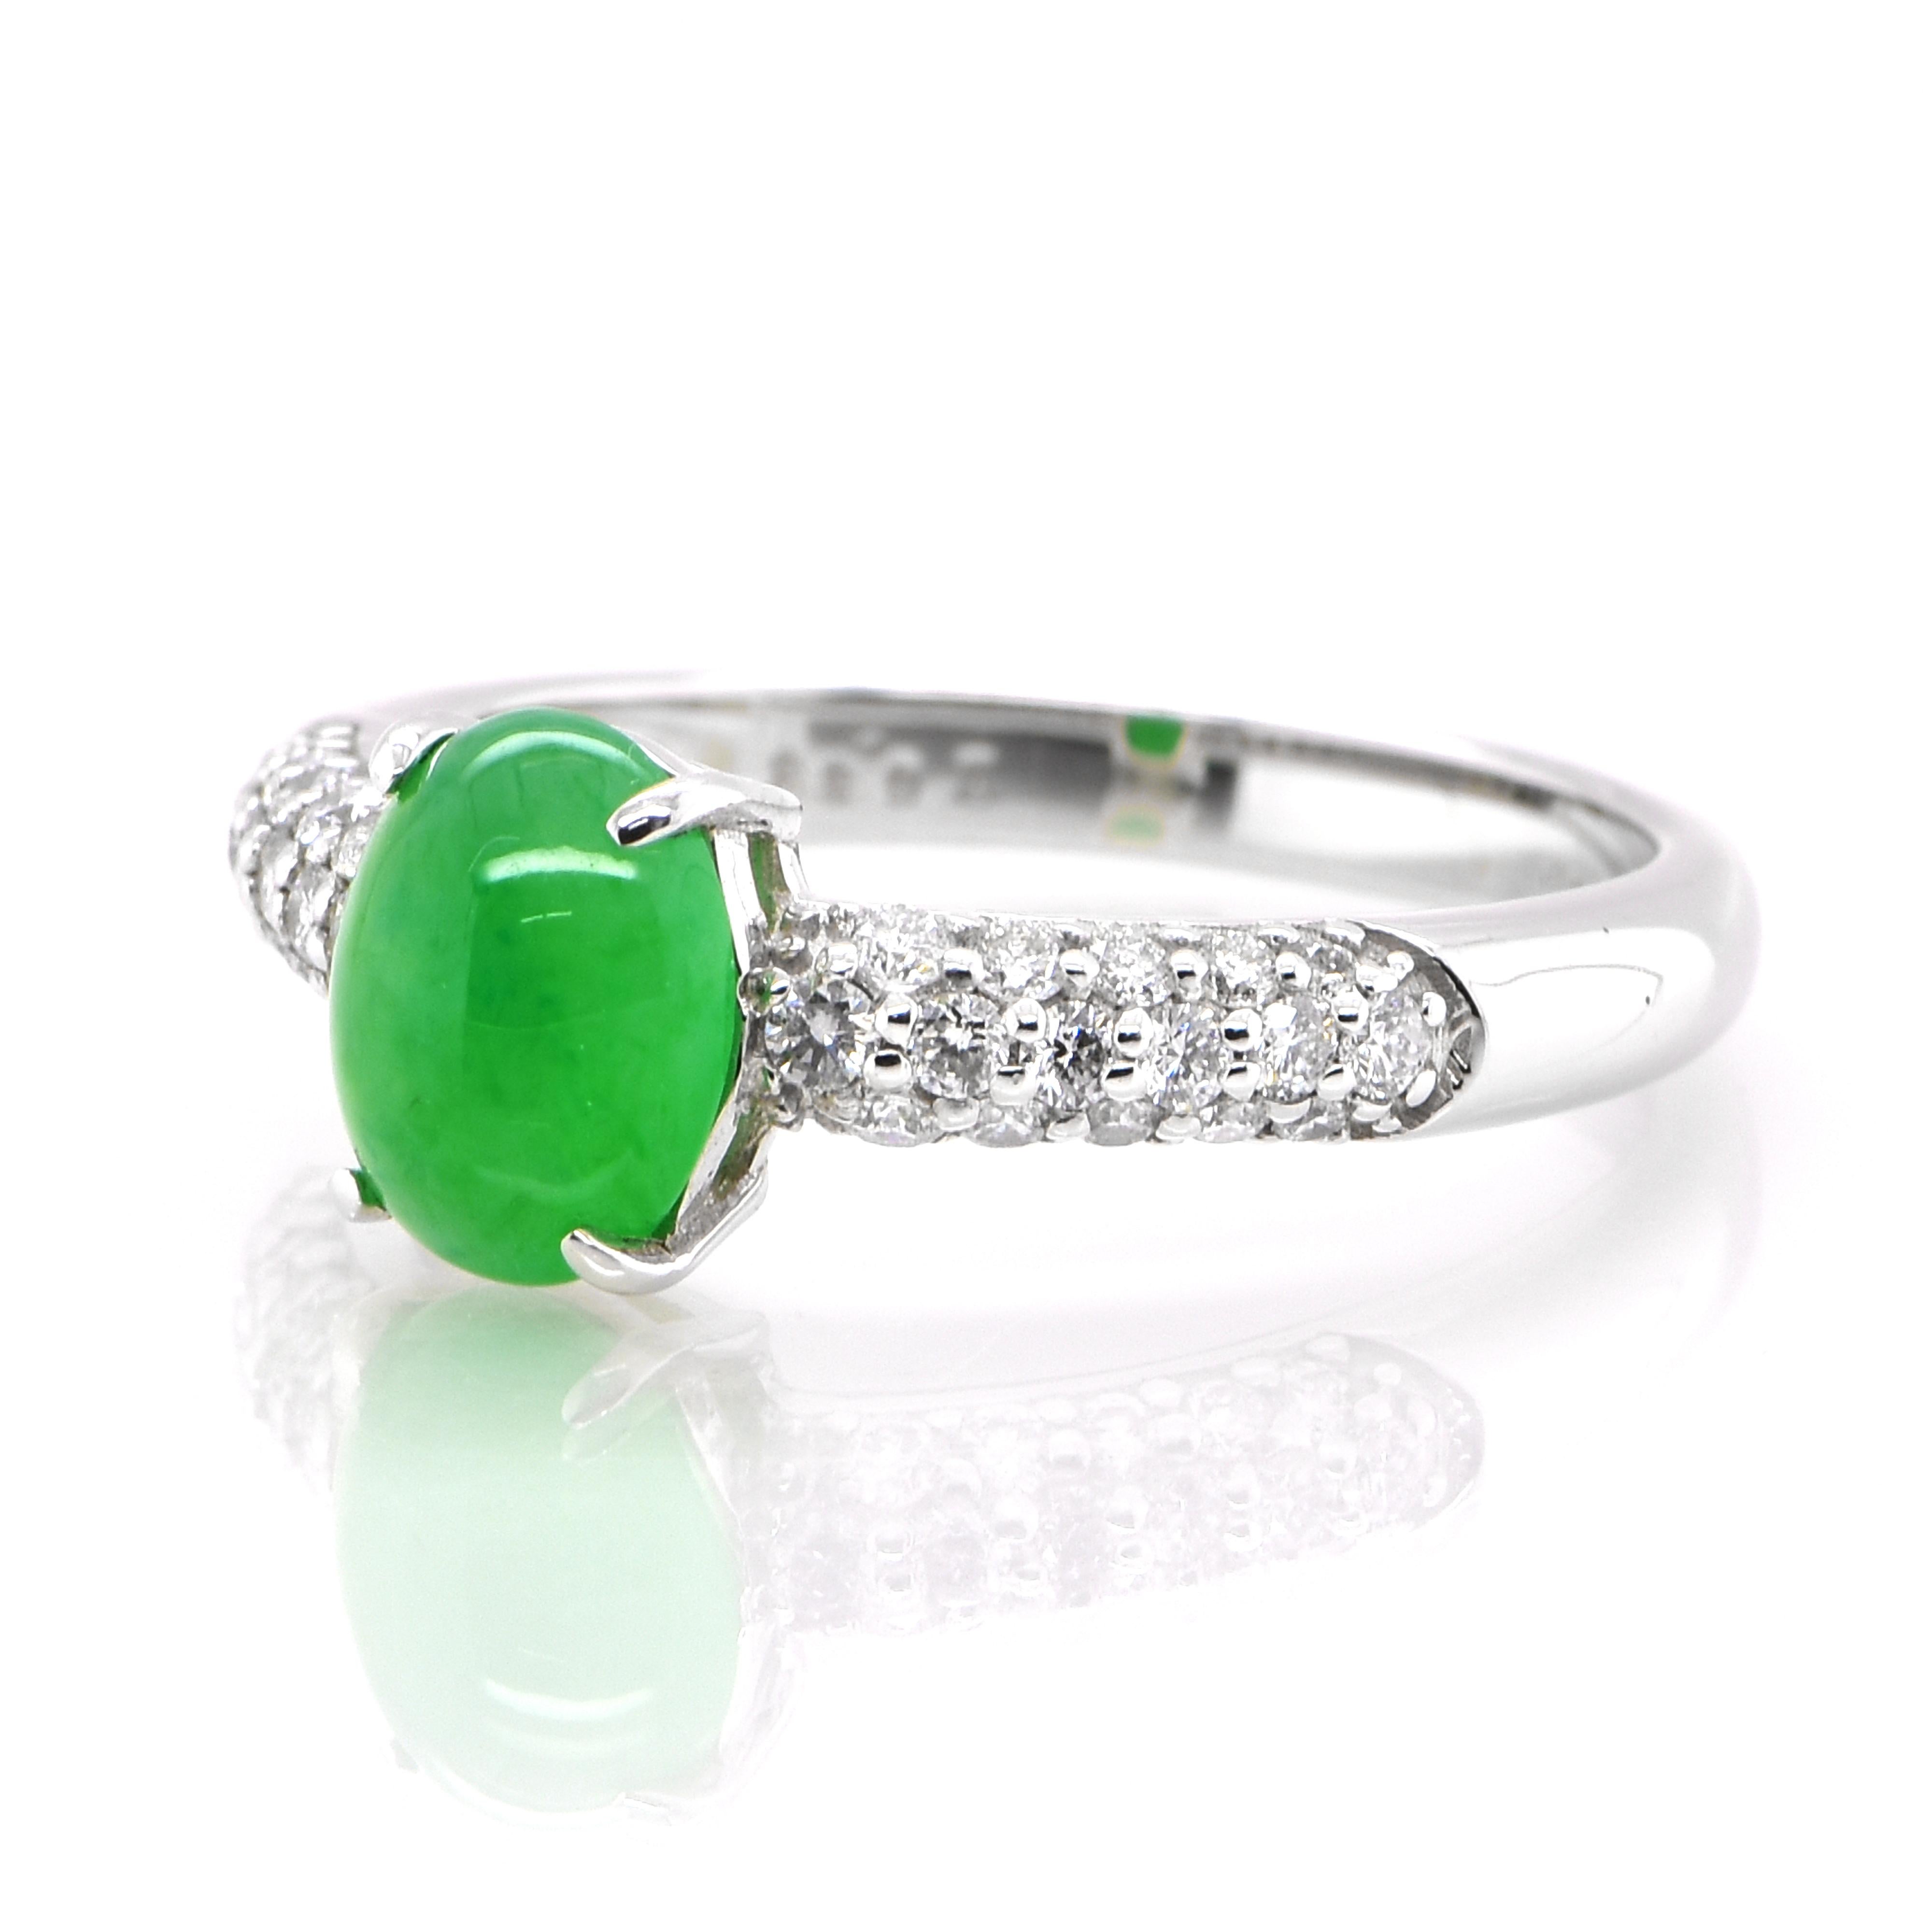 A beautiful Ring featuring a 1.19 Carat, Natural, Non-dyed Jadeite and 0.33 Carats of Diamond Accents set in Platinum. Jadeite has been cherished for millennia. Its nature is pure and enduring, yet sensuous and luxurious. Jadeite’s exceptional look